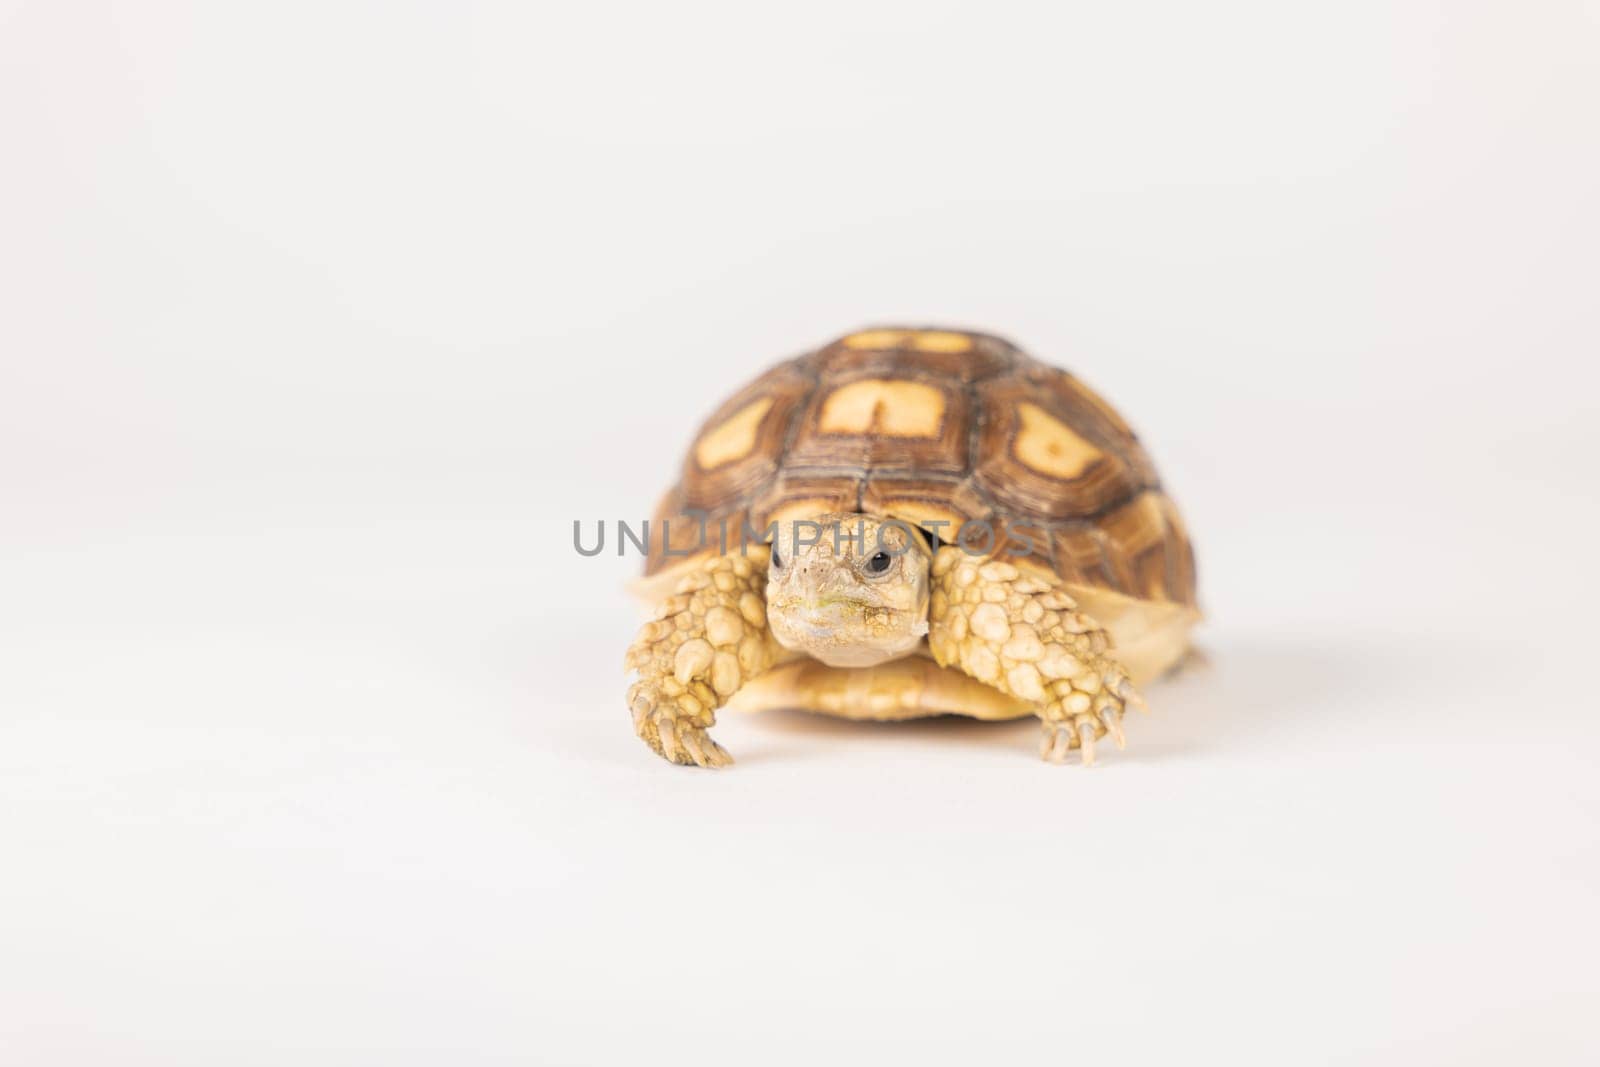 African spurred tortoise, or sulcata tortoise, is featured in this isolated portrait, emphasizing the beauty of its unique design and cute features against a white background.